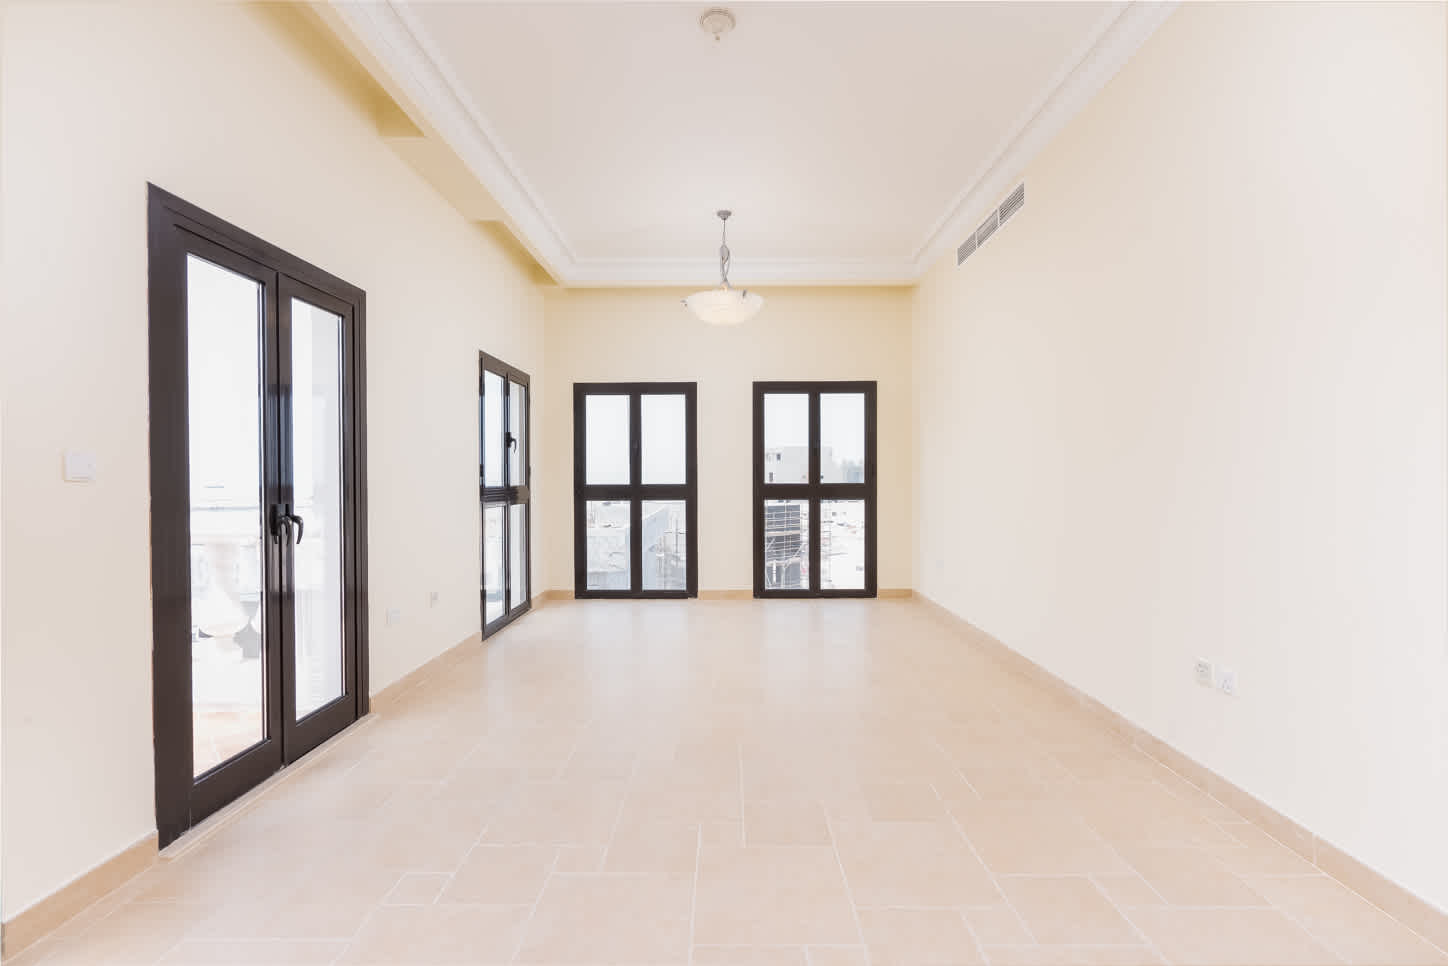 25 Spaces Real Estate - Qanat Quartier - Properties for Rent - 15th of MAY 2022 (ref THS2525)8